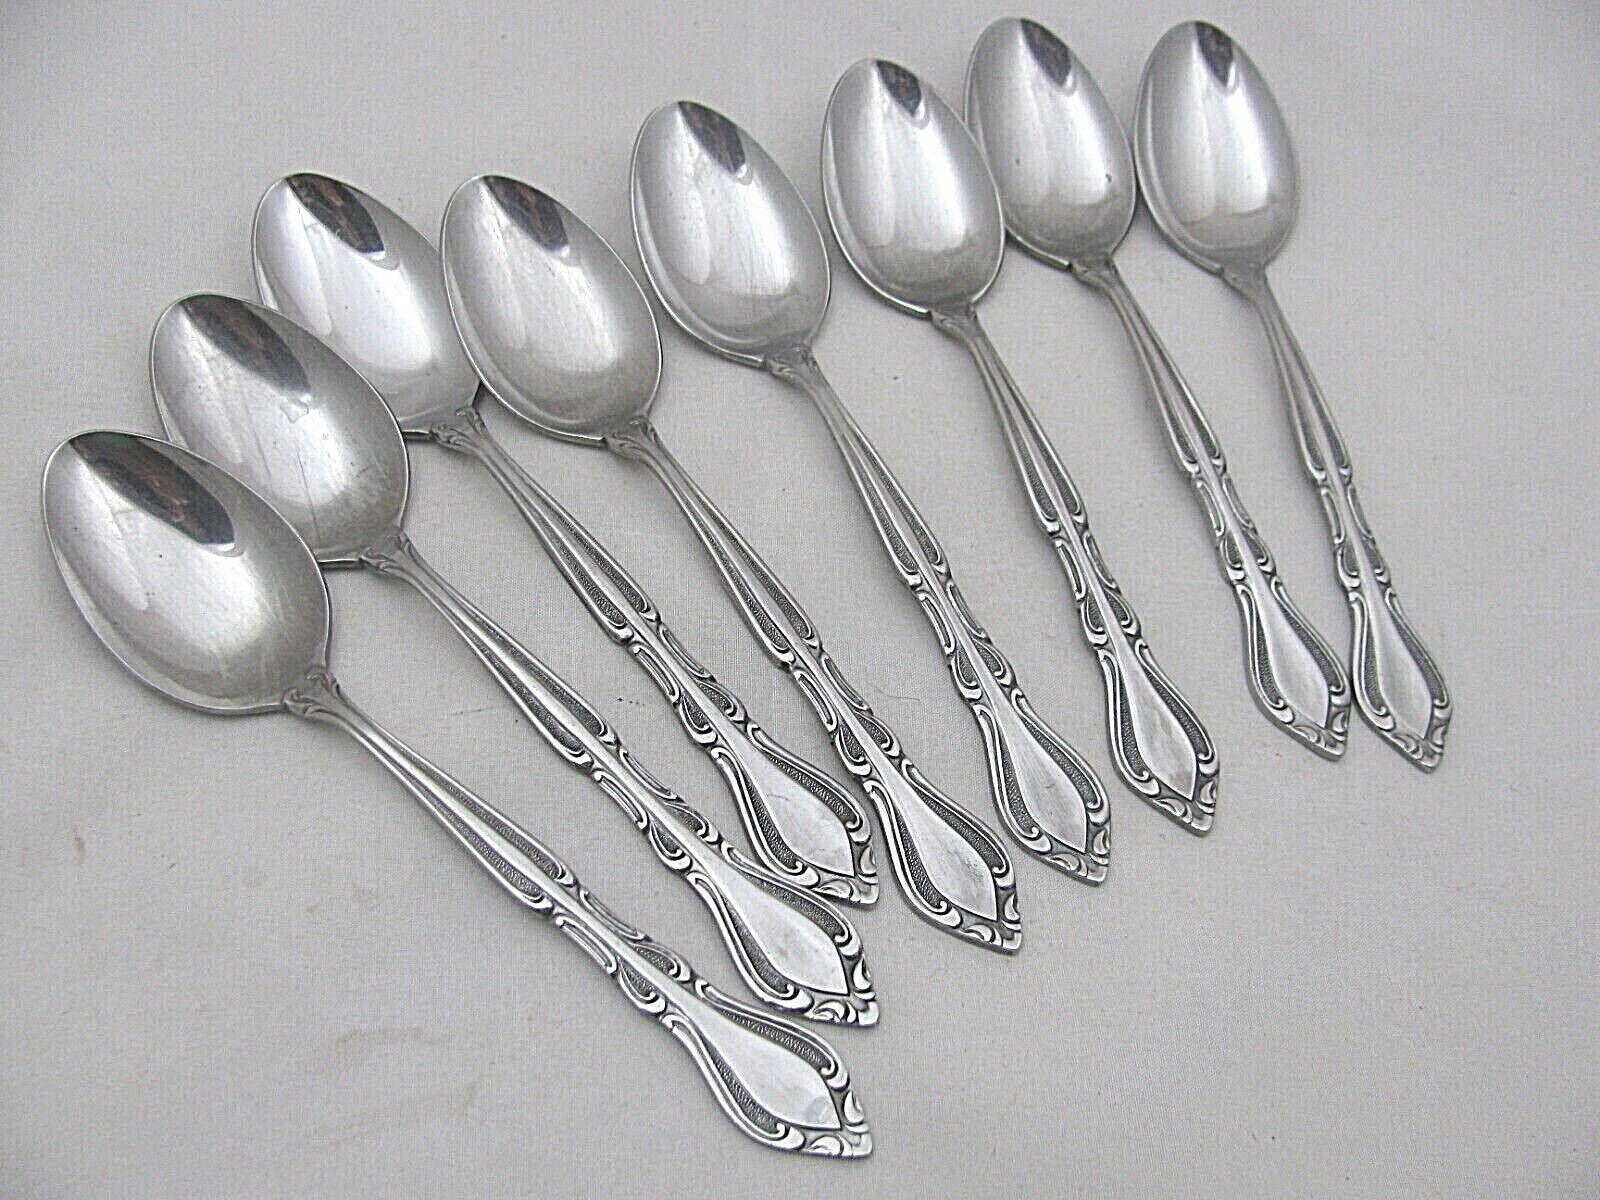 Primary image for ROGERS CO. KOREA STANLEY ROBERTS AUBERGE STAINLESS flatware 8 TEASPOONS